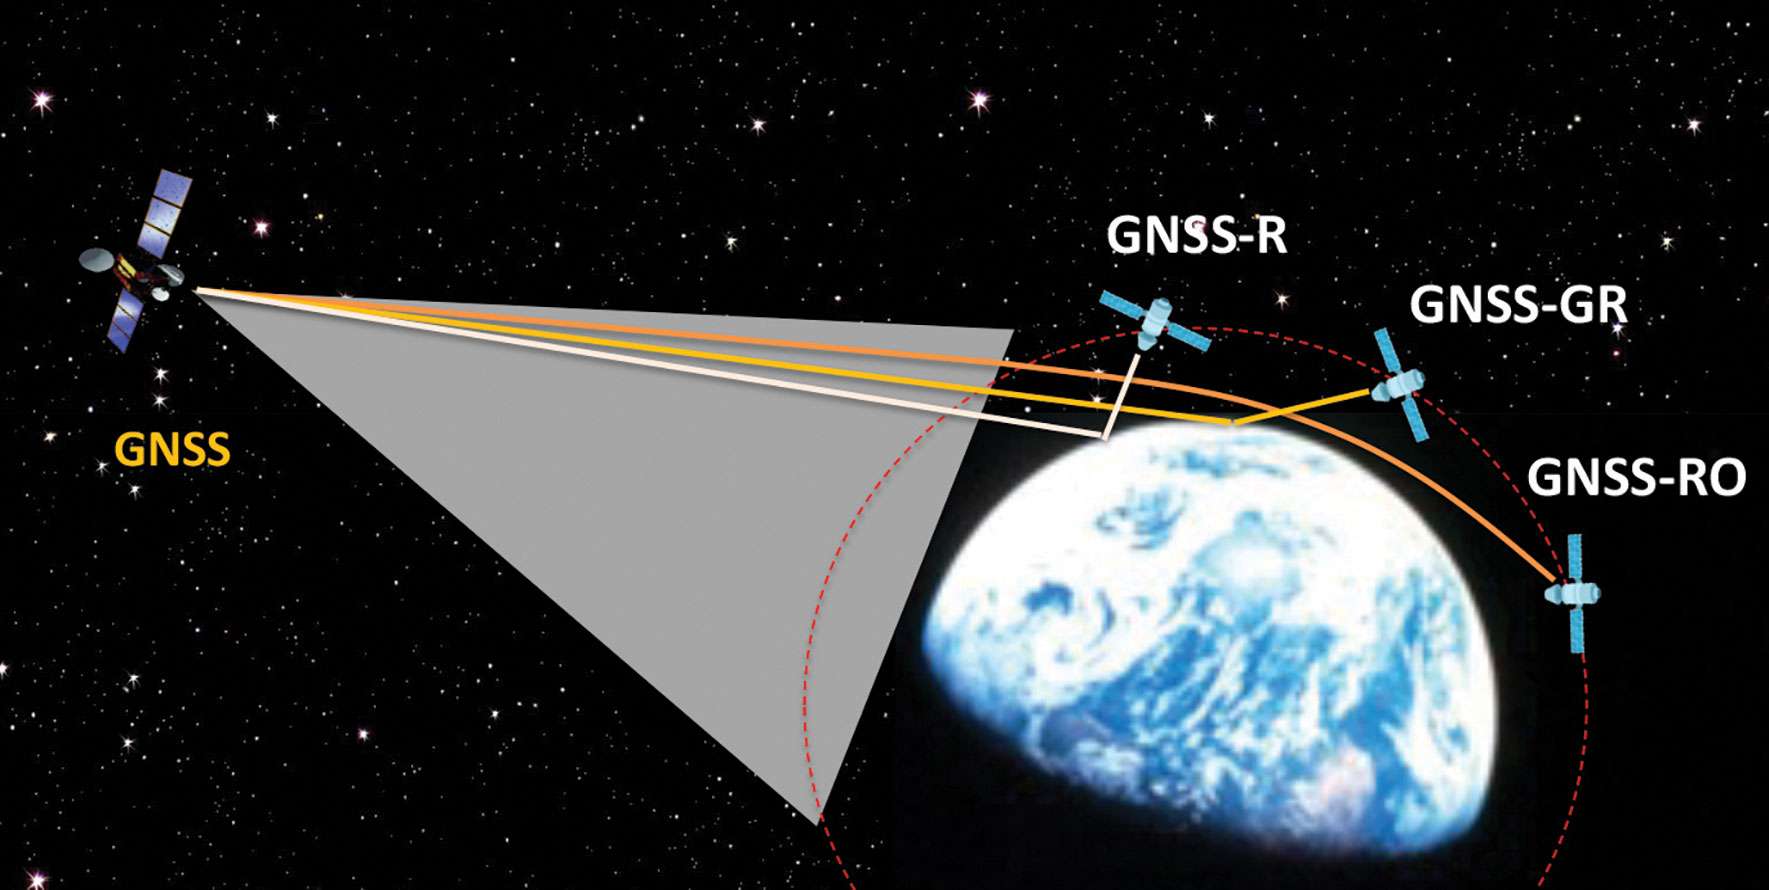 Figure 1: Scientific observations with GNSS radio occultation (GNSS-RO), GNSS grazing-angle reflectometry (GNSS-GR) and GNSS reflectometry (GNSS-R) techniques from low-Earth orbit (LEO). (Figure provided by the author)